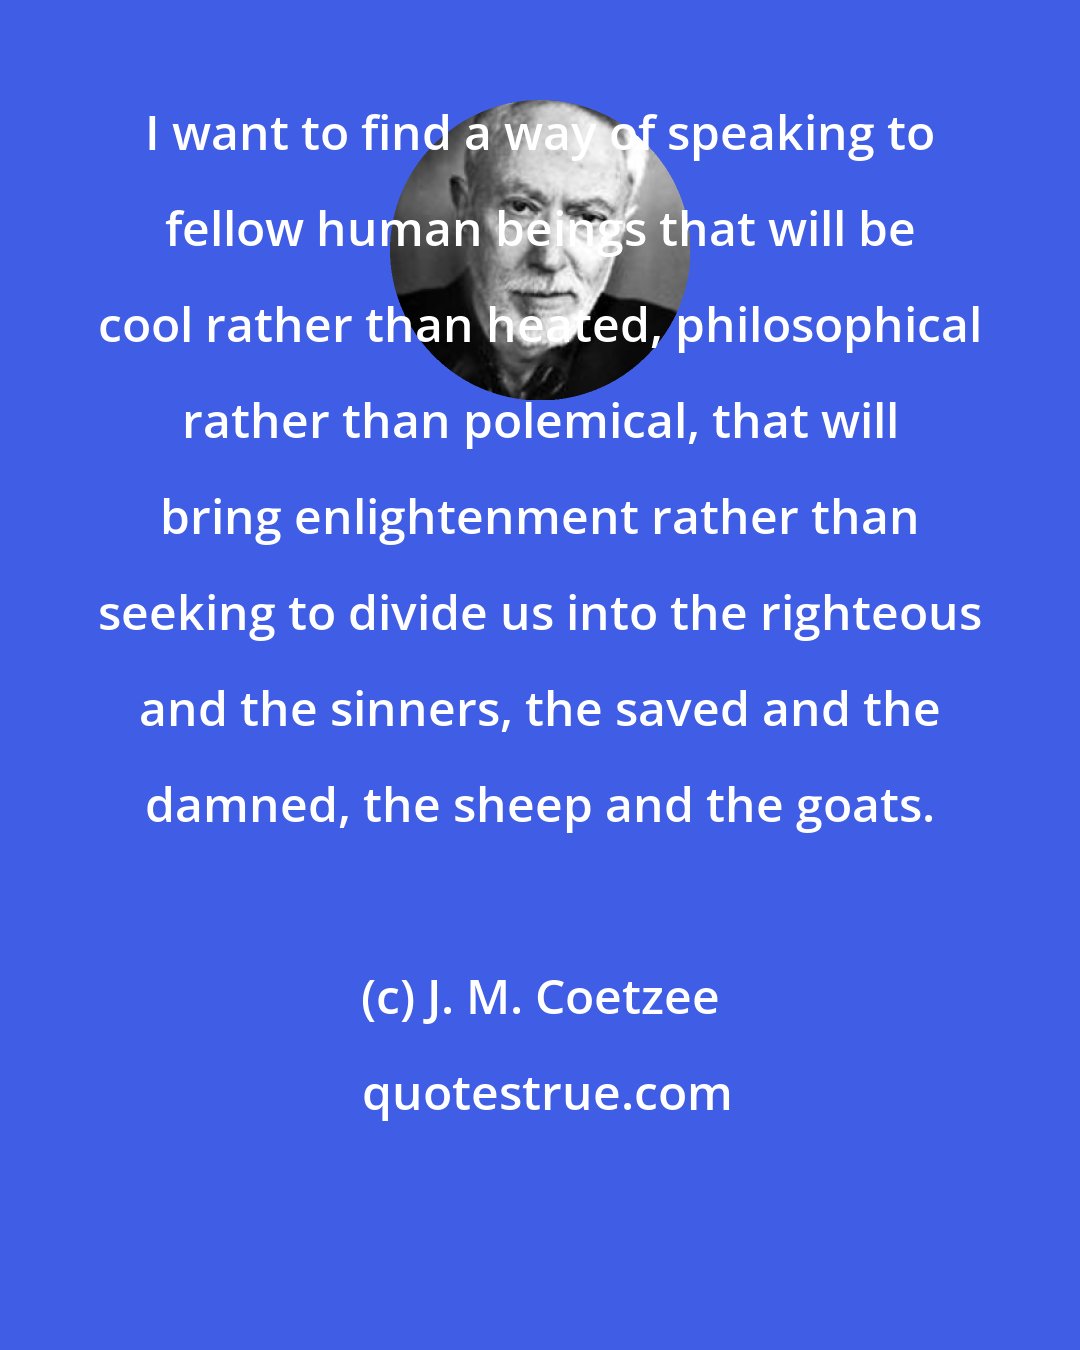 J. M. Coetzee: I want to find a way of speaking to fellow human beings that will be cool rather than heated, philosophical rather than polemical, that will bring enlightenment rather than seeking to divide us into the righteous and the sinners, the saved and the damned, the sheep and the goats.